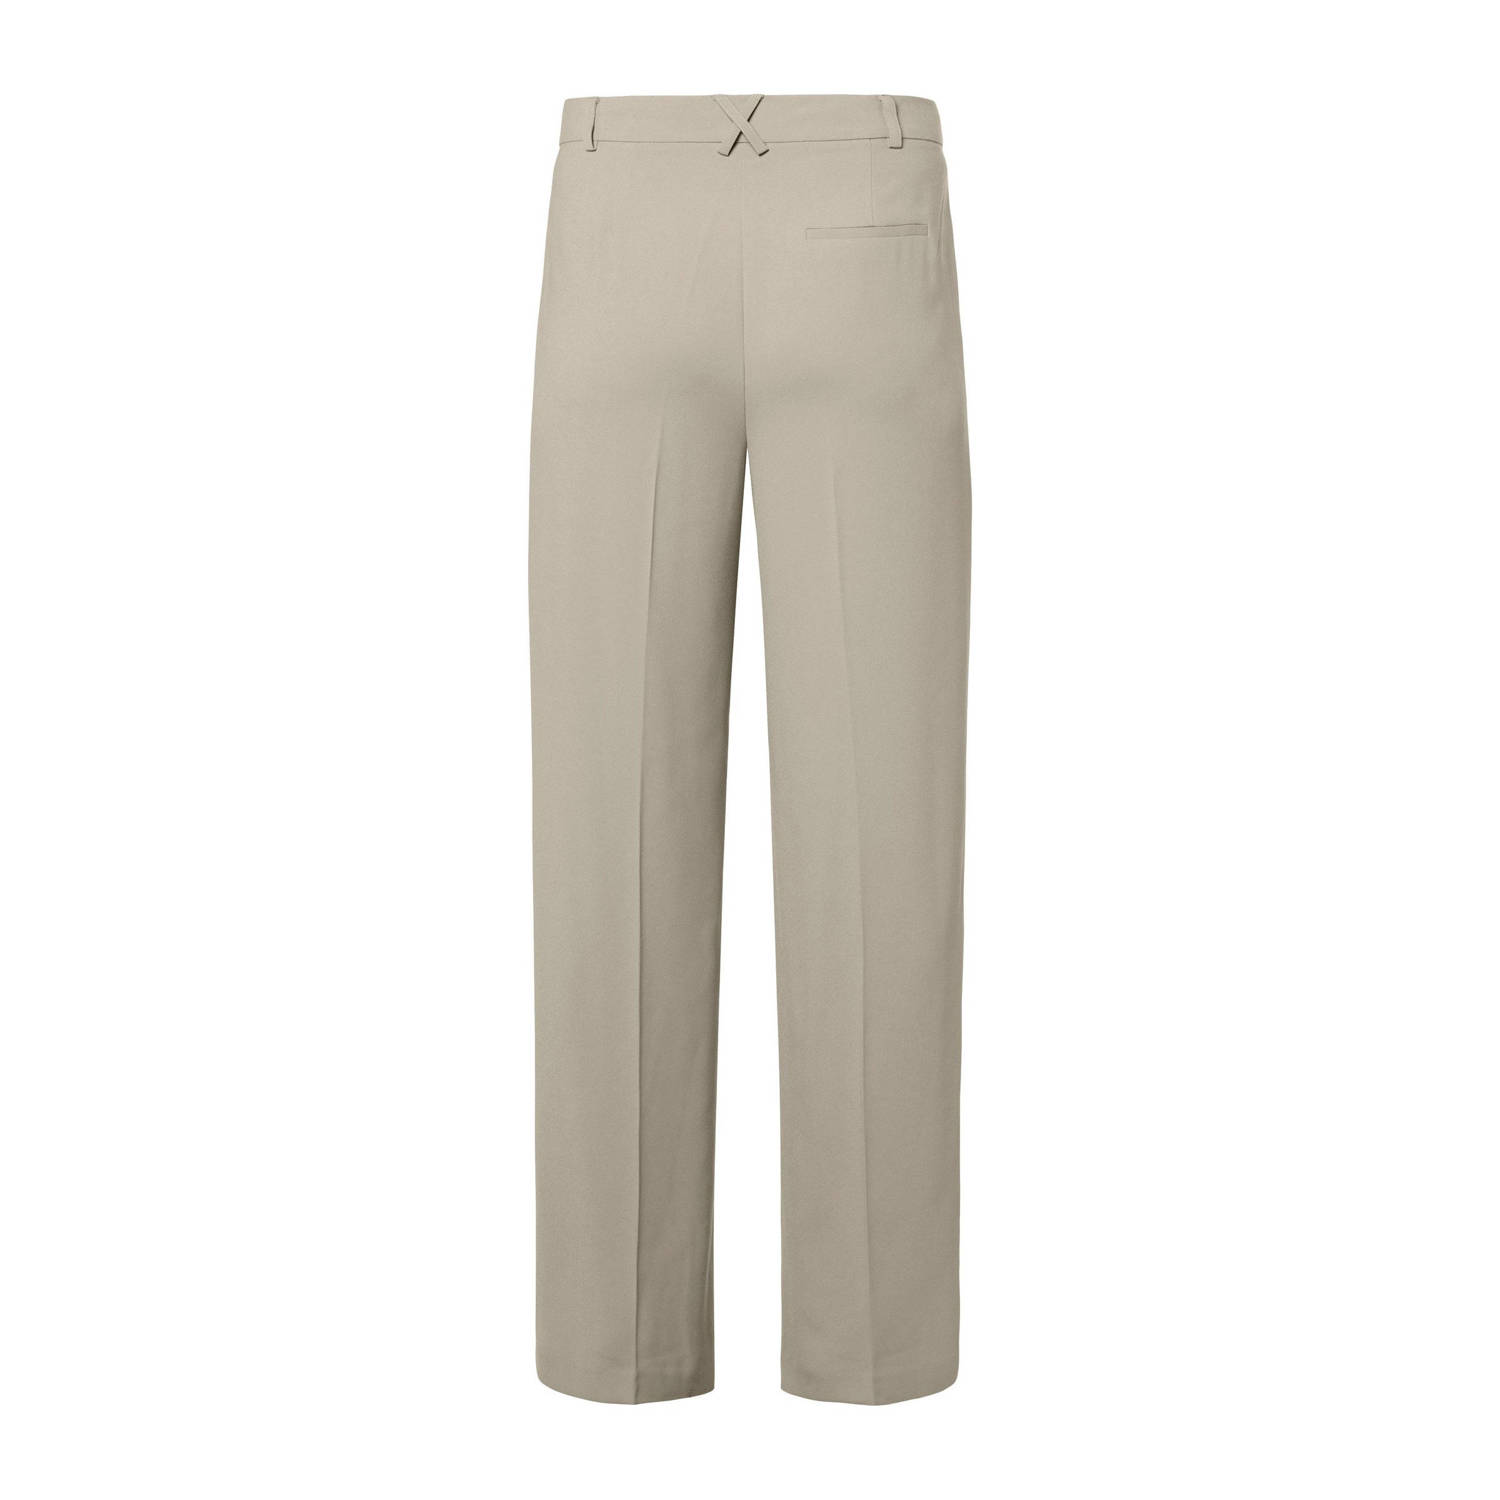 Beaumont high waist straight fit pantalon James van gerecycled polyester taupe